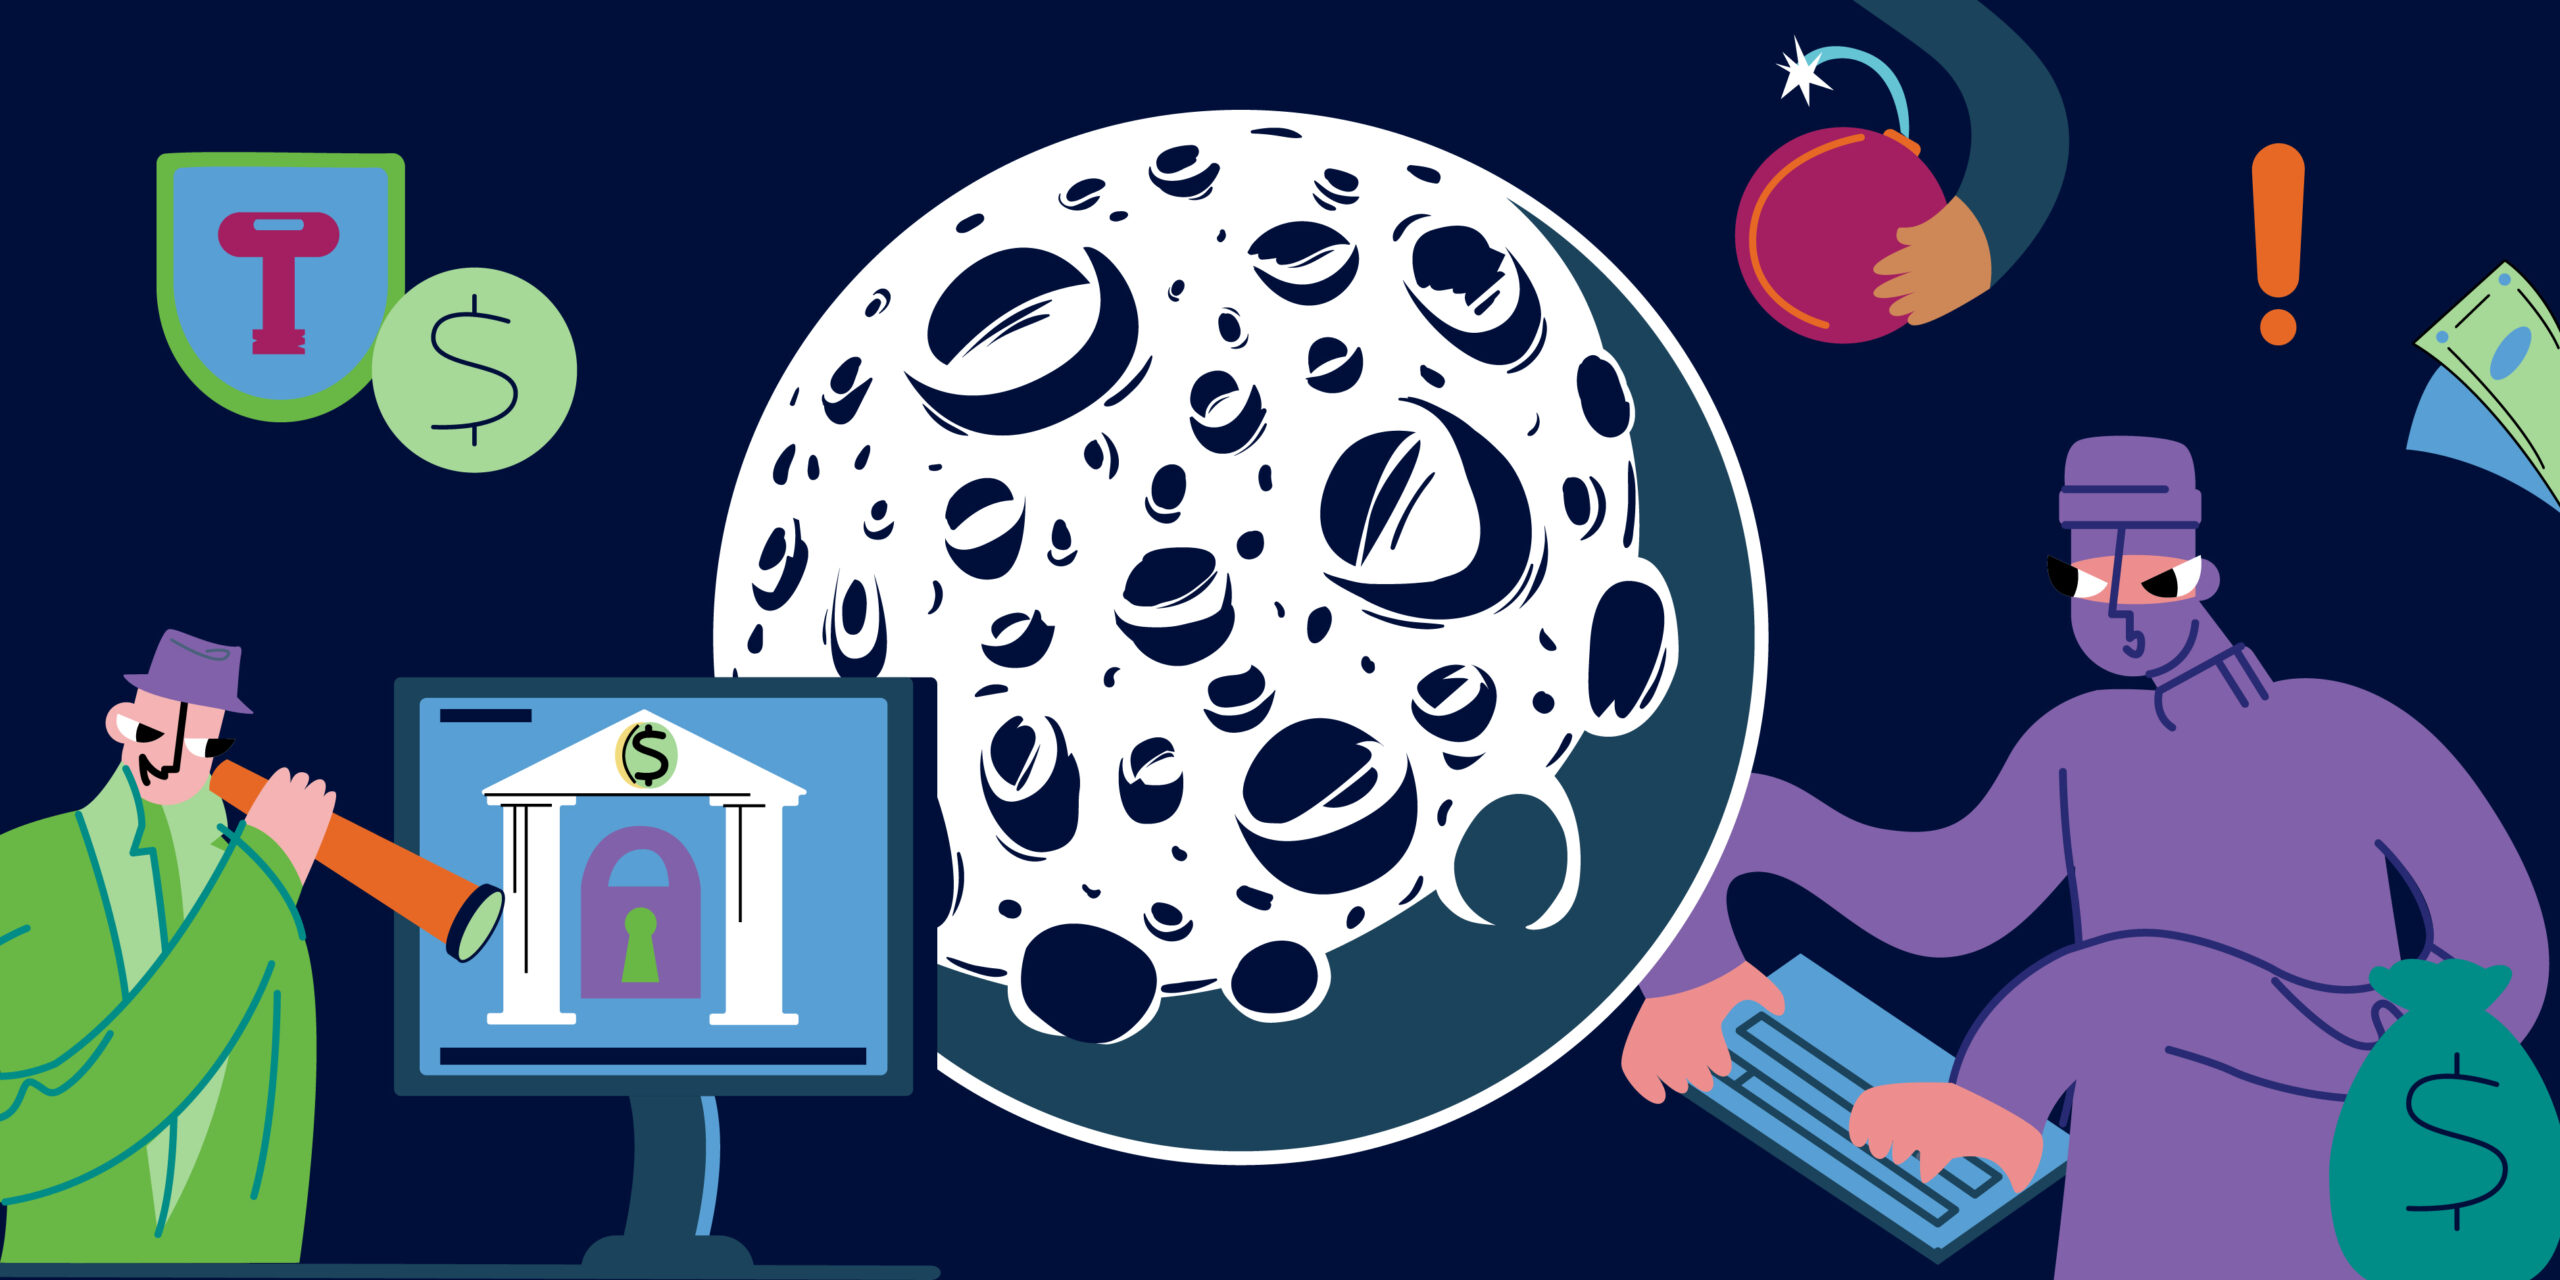 Close-up of the moon with three fraudsters around it one holding a telescope, one holding a lit bomb, and one typing on a keyboard representing real-time payments fraud.